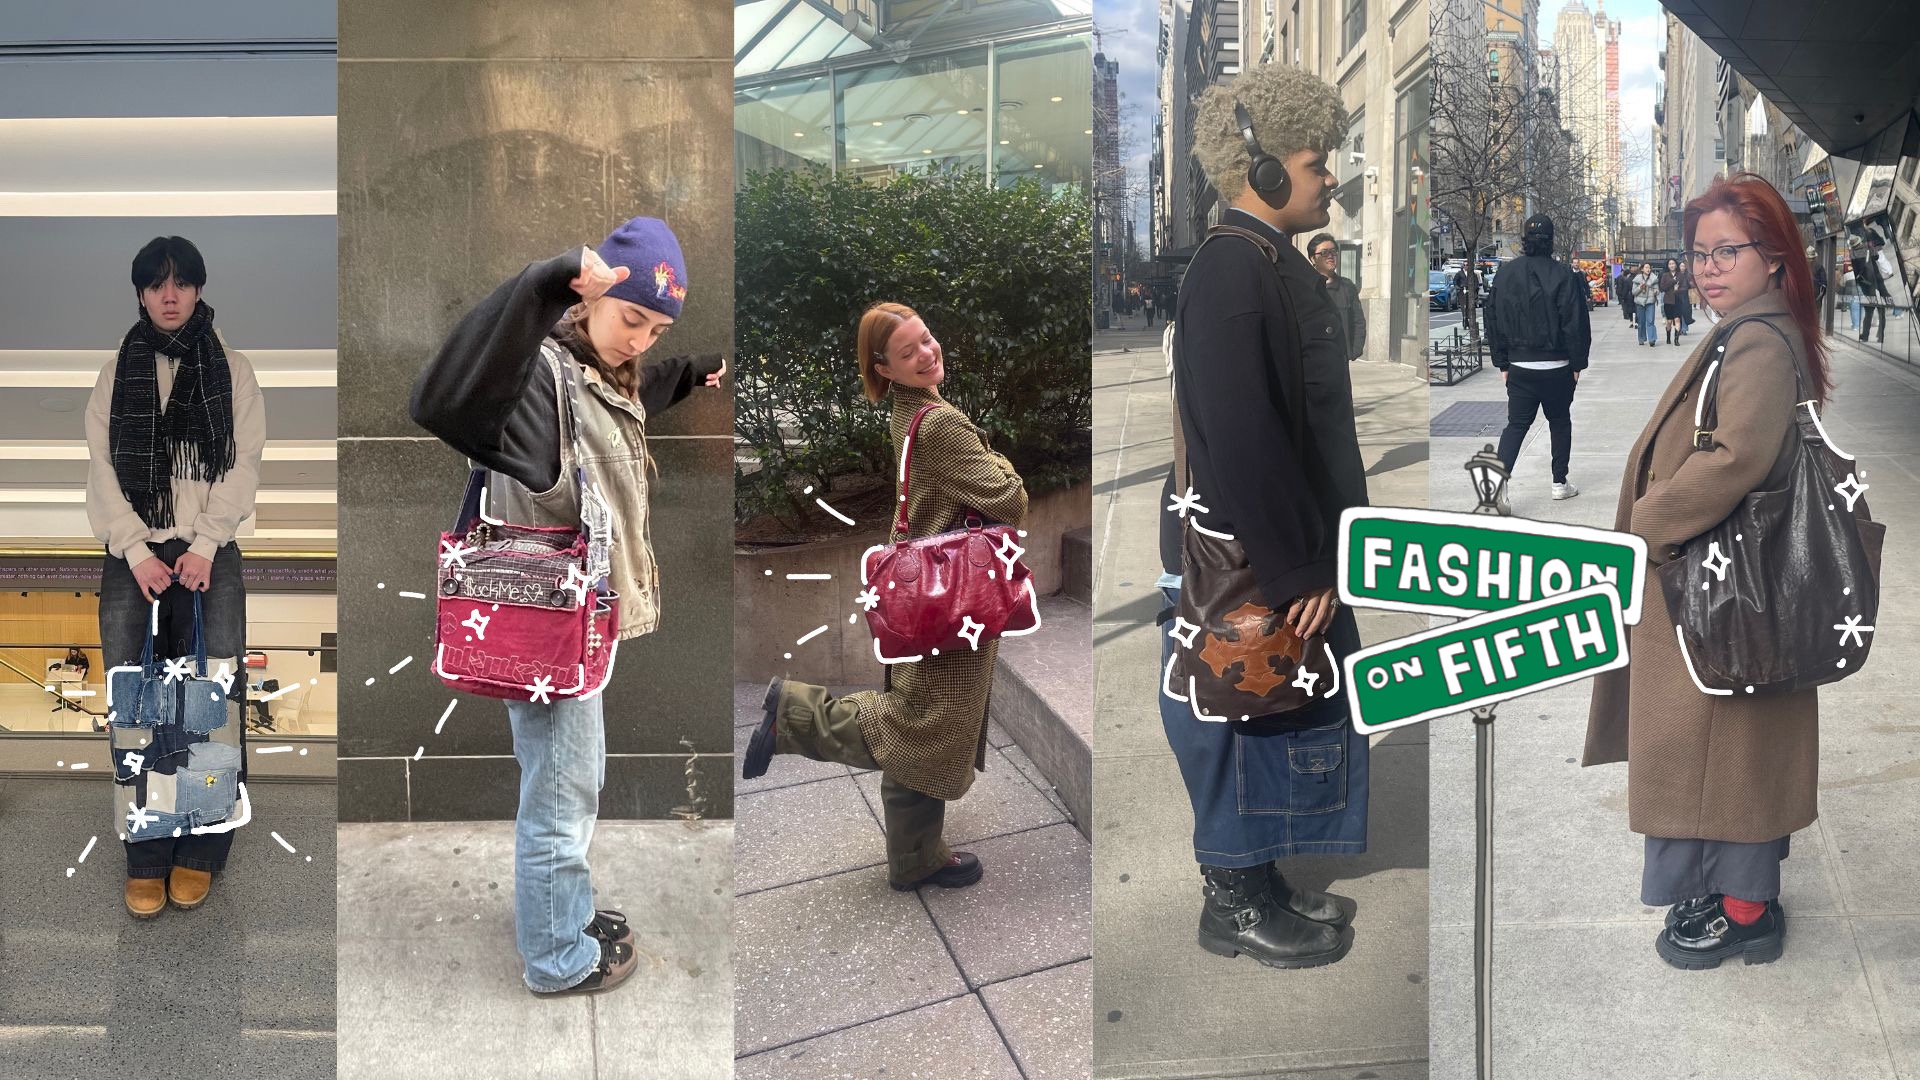 Five New School students collaged side-by-side. Toward the right is an illustrated street sign that says “Fashion on Fifth.”